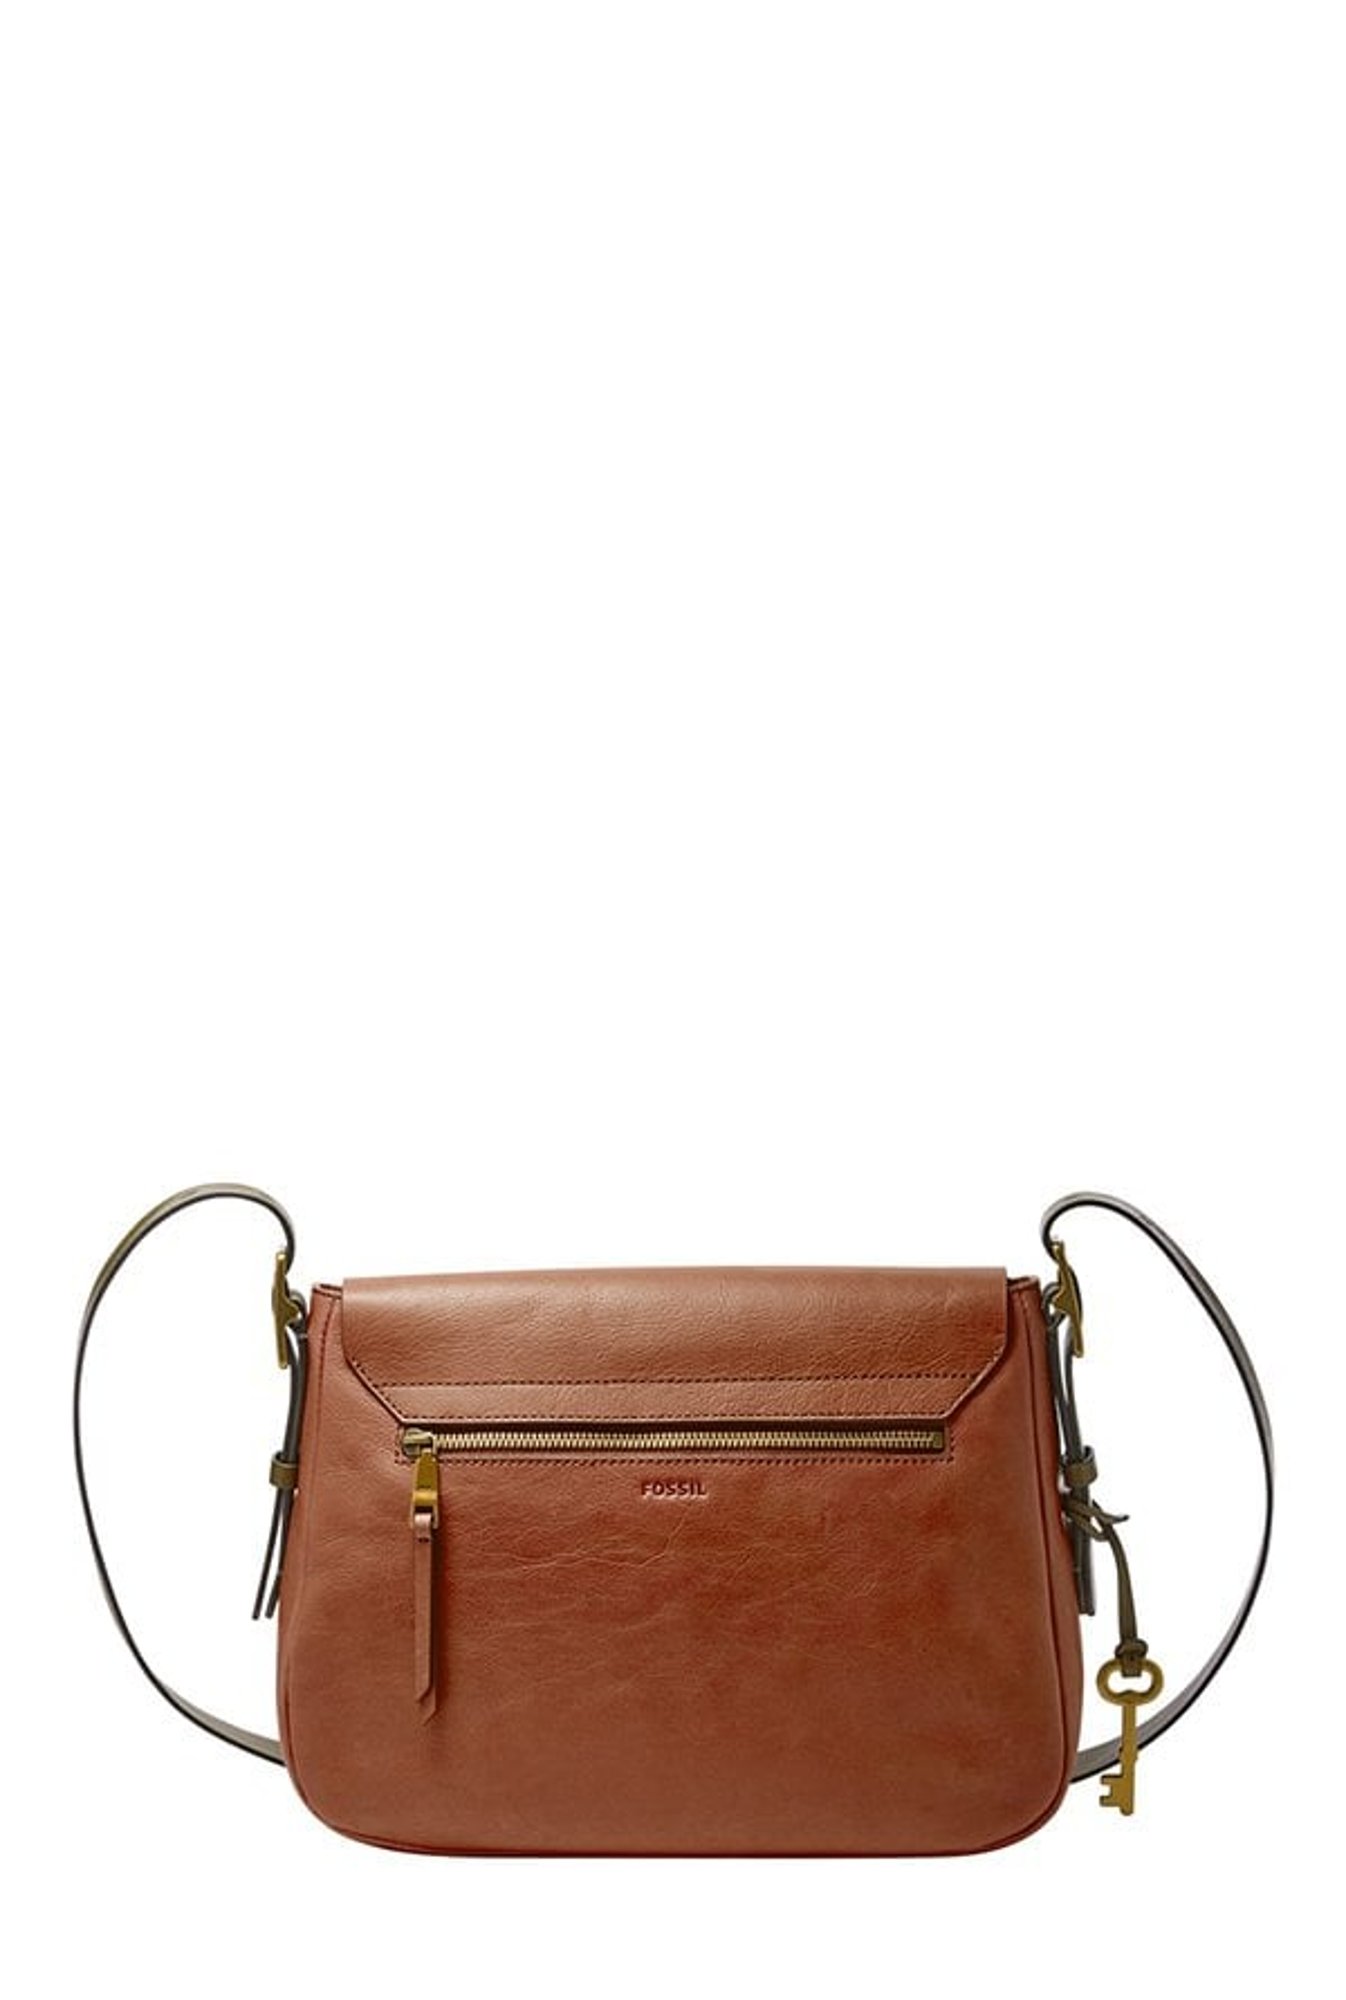 Buy Fossil Fossil Female's Heritage brown Leather Wallets & Purses  SL8231200 Online | ZALORA Malaysia